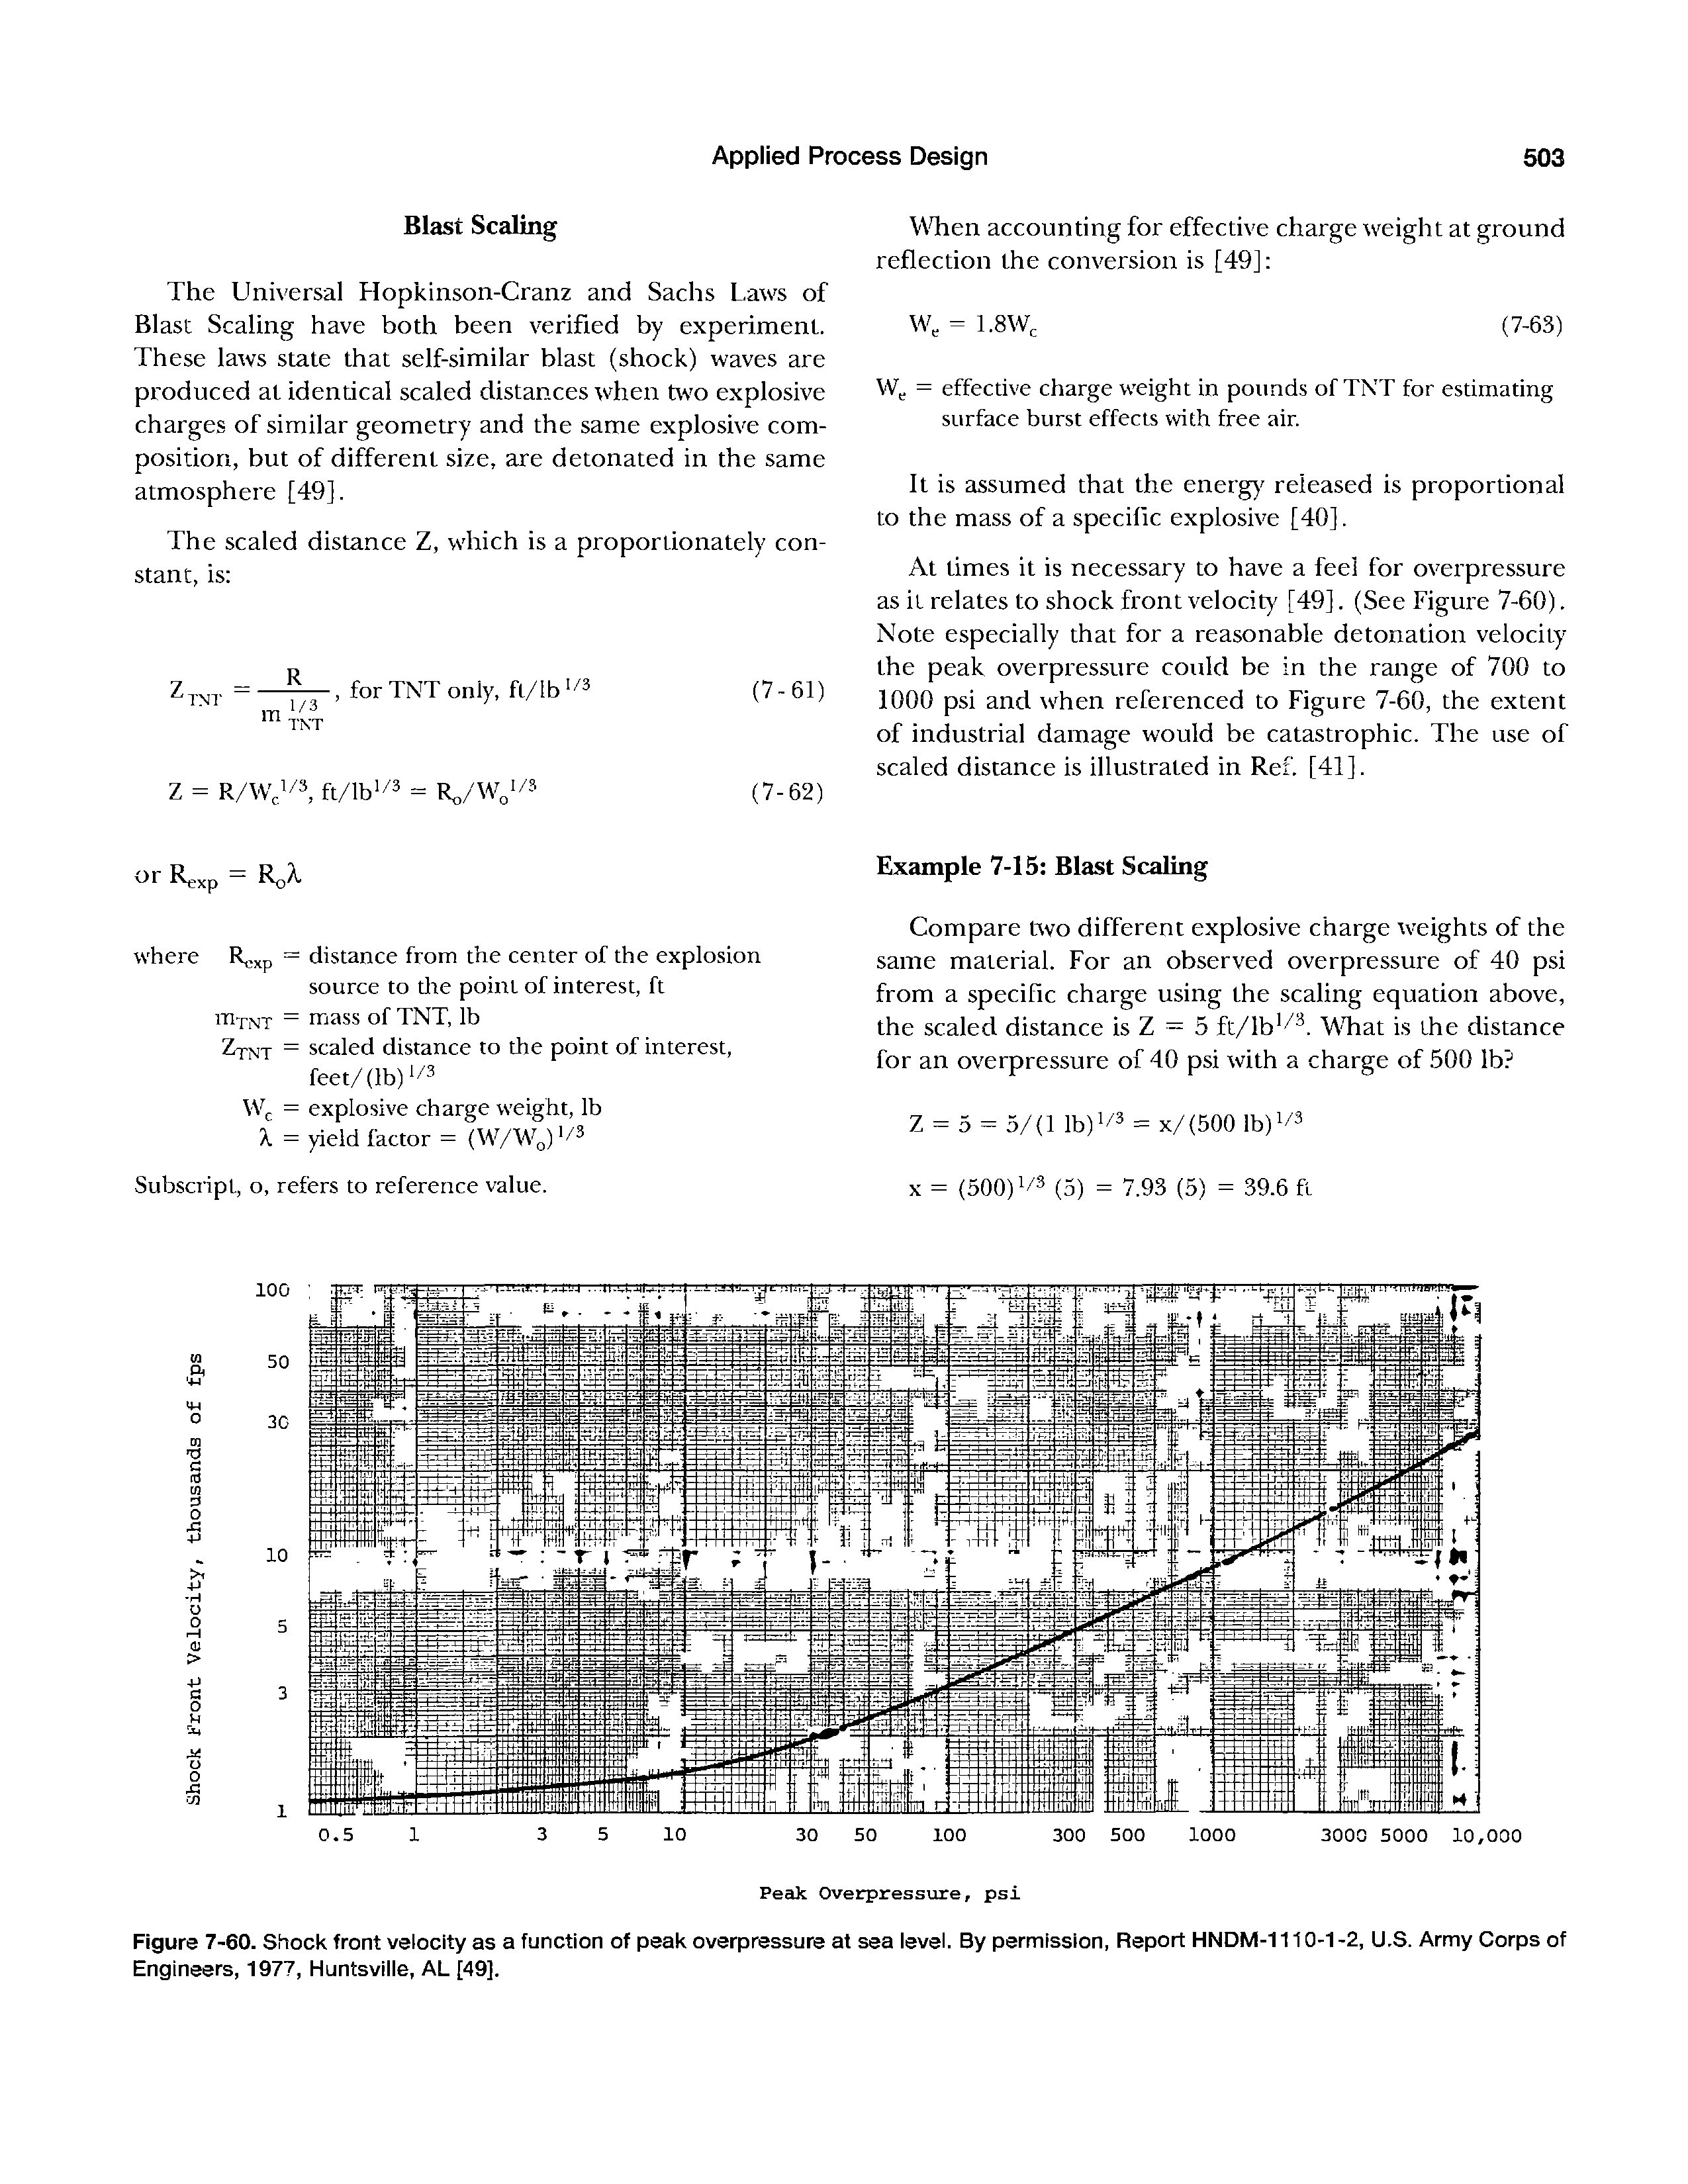 Figure 7-60. Shock front velocity as a function of peak overpressure at sea ievel. By permission, Report HNDM-1110-1 -2, U.S. Army Corps of Engineers, 1977, Huntsviiie, AL [49].